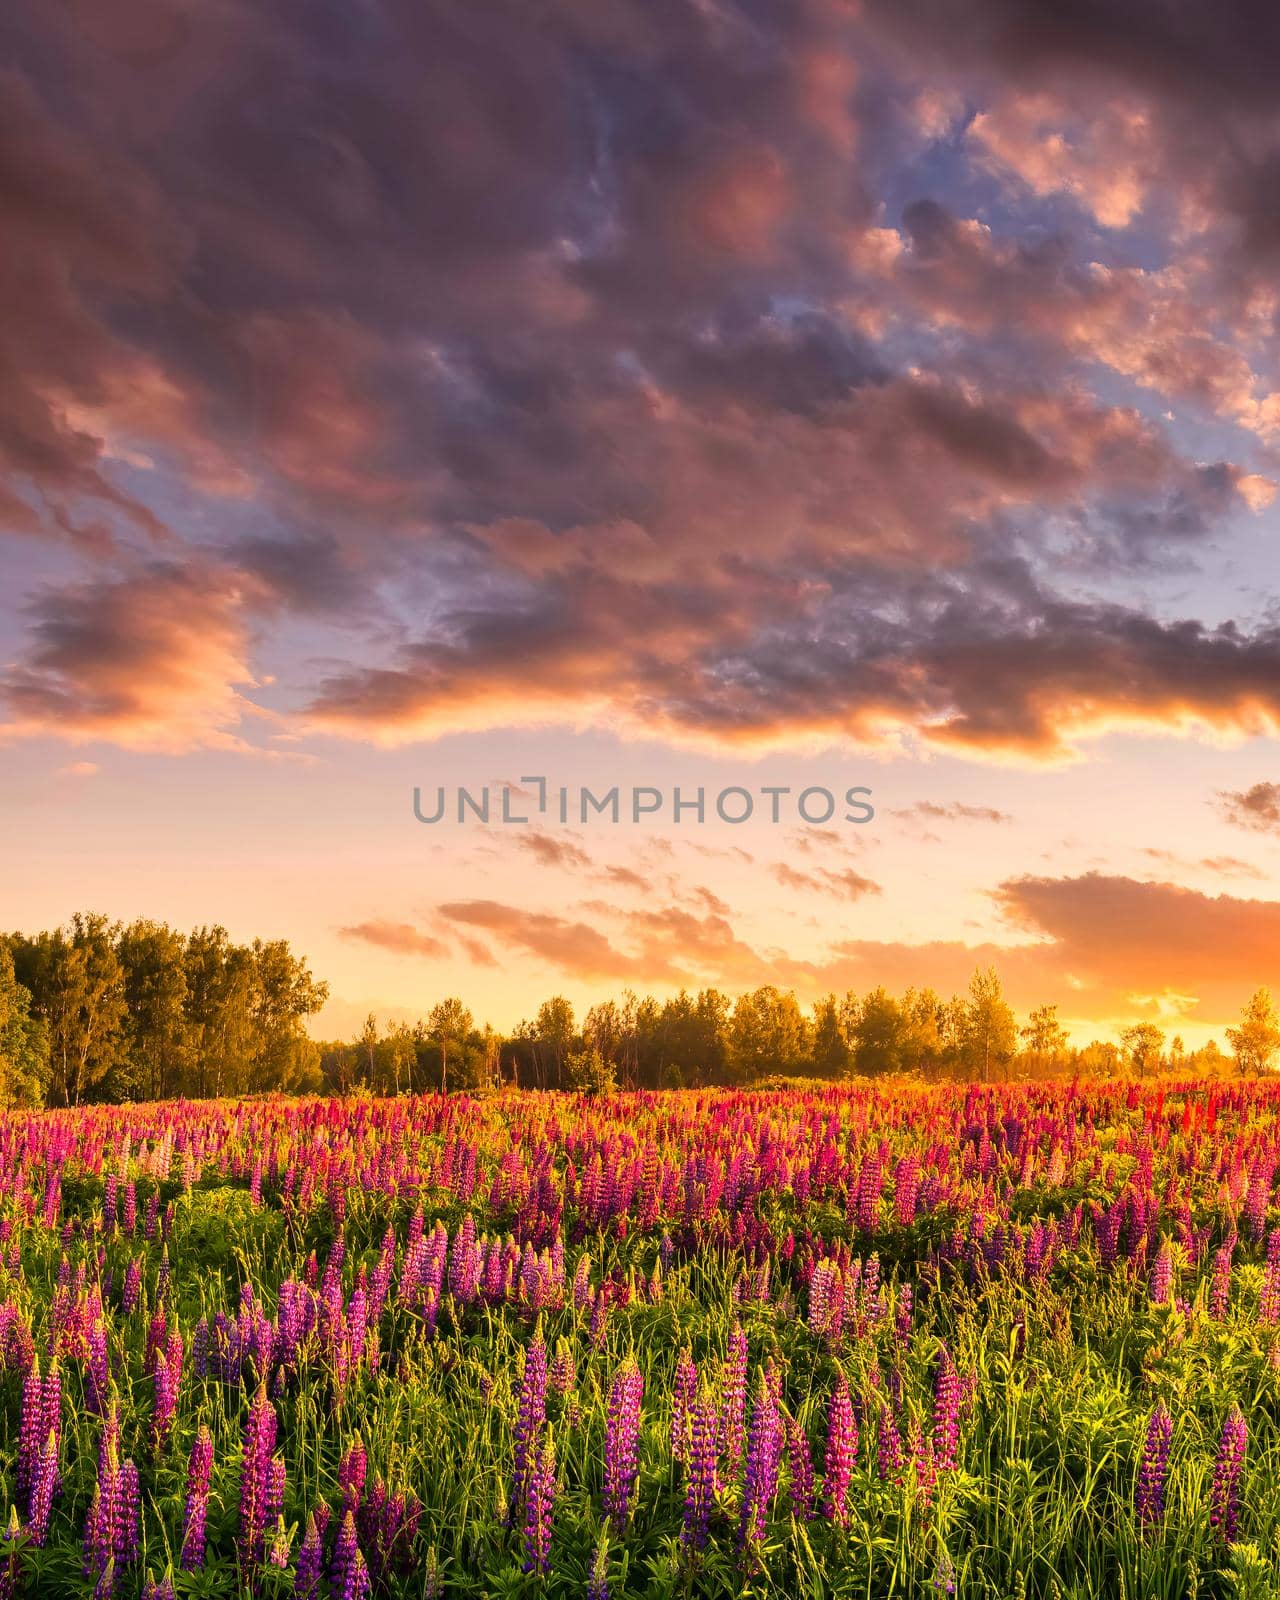 Sunset or sunrise on a field with purple wild lupines and cloudy sky in summer.